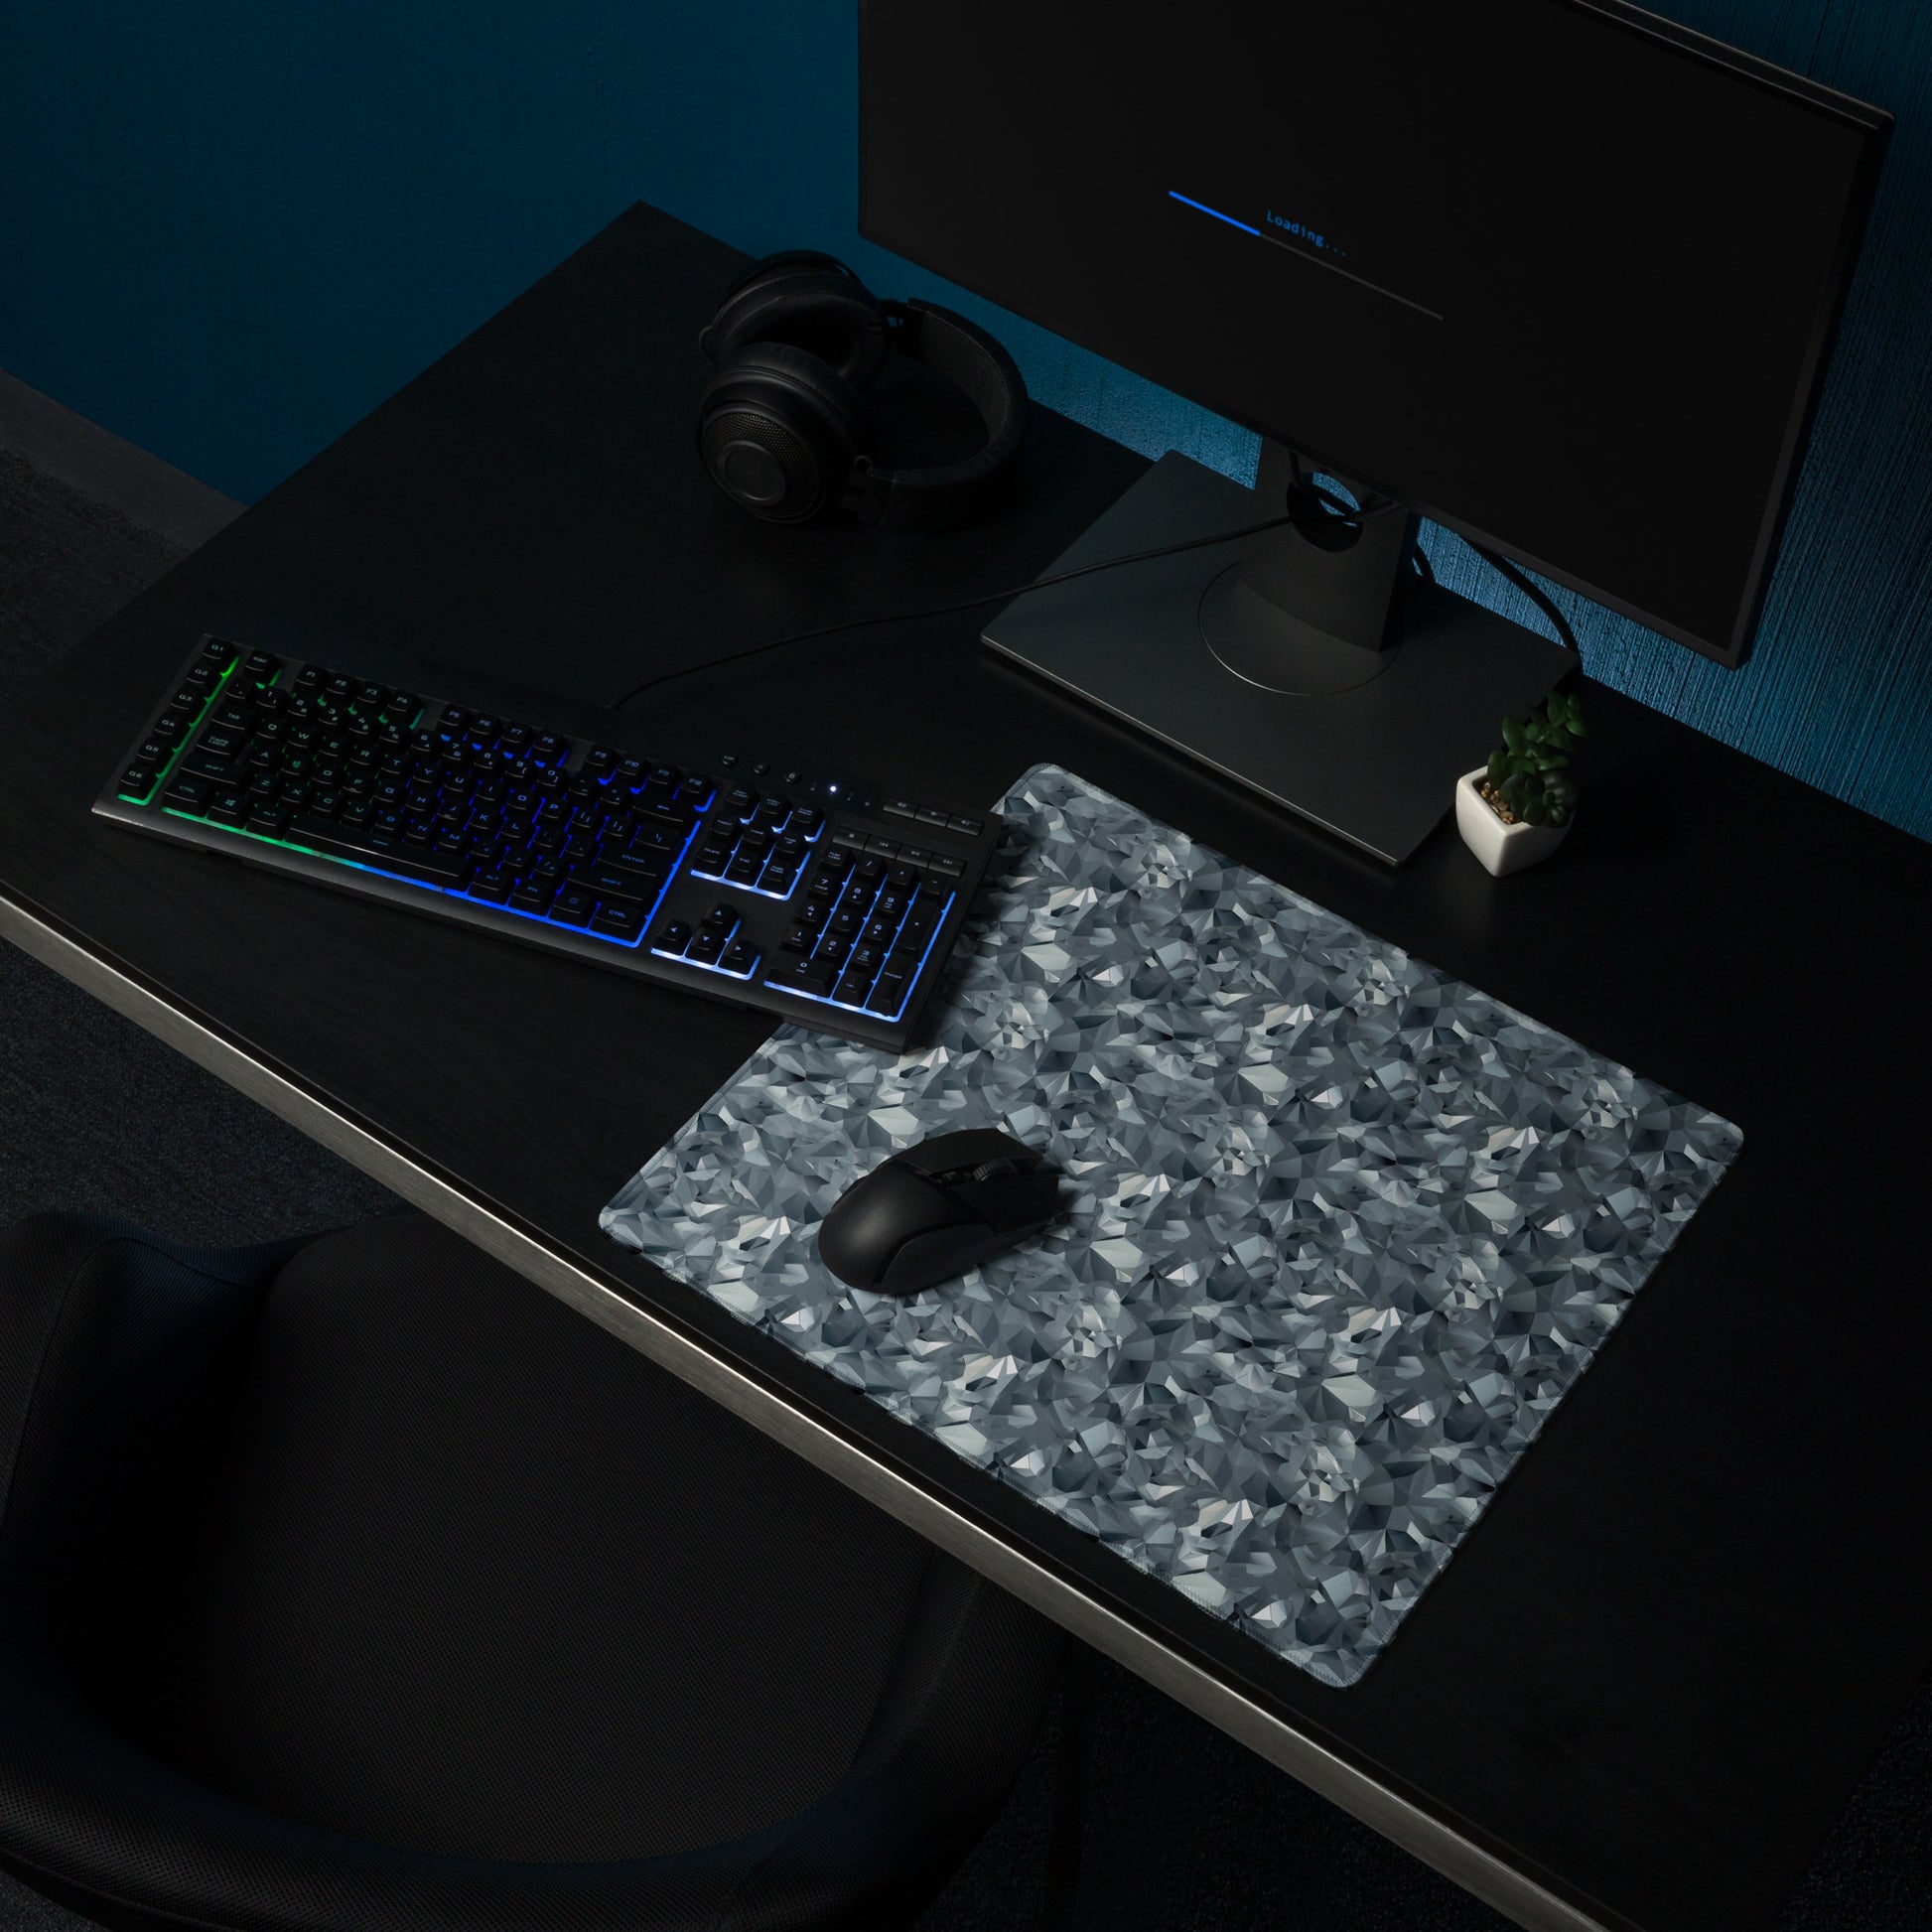 An 18" x 16" gaming desk pad with gray crystals. It sits on a black desk with a monitor, keyboard, and mouse.